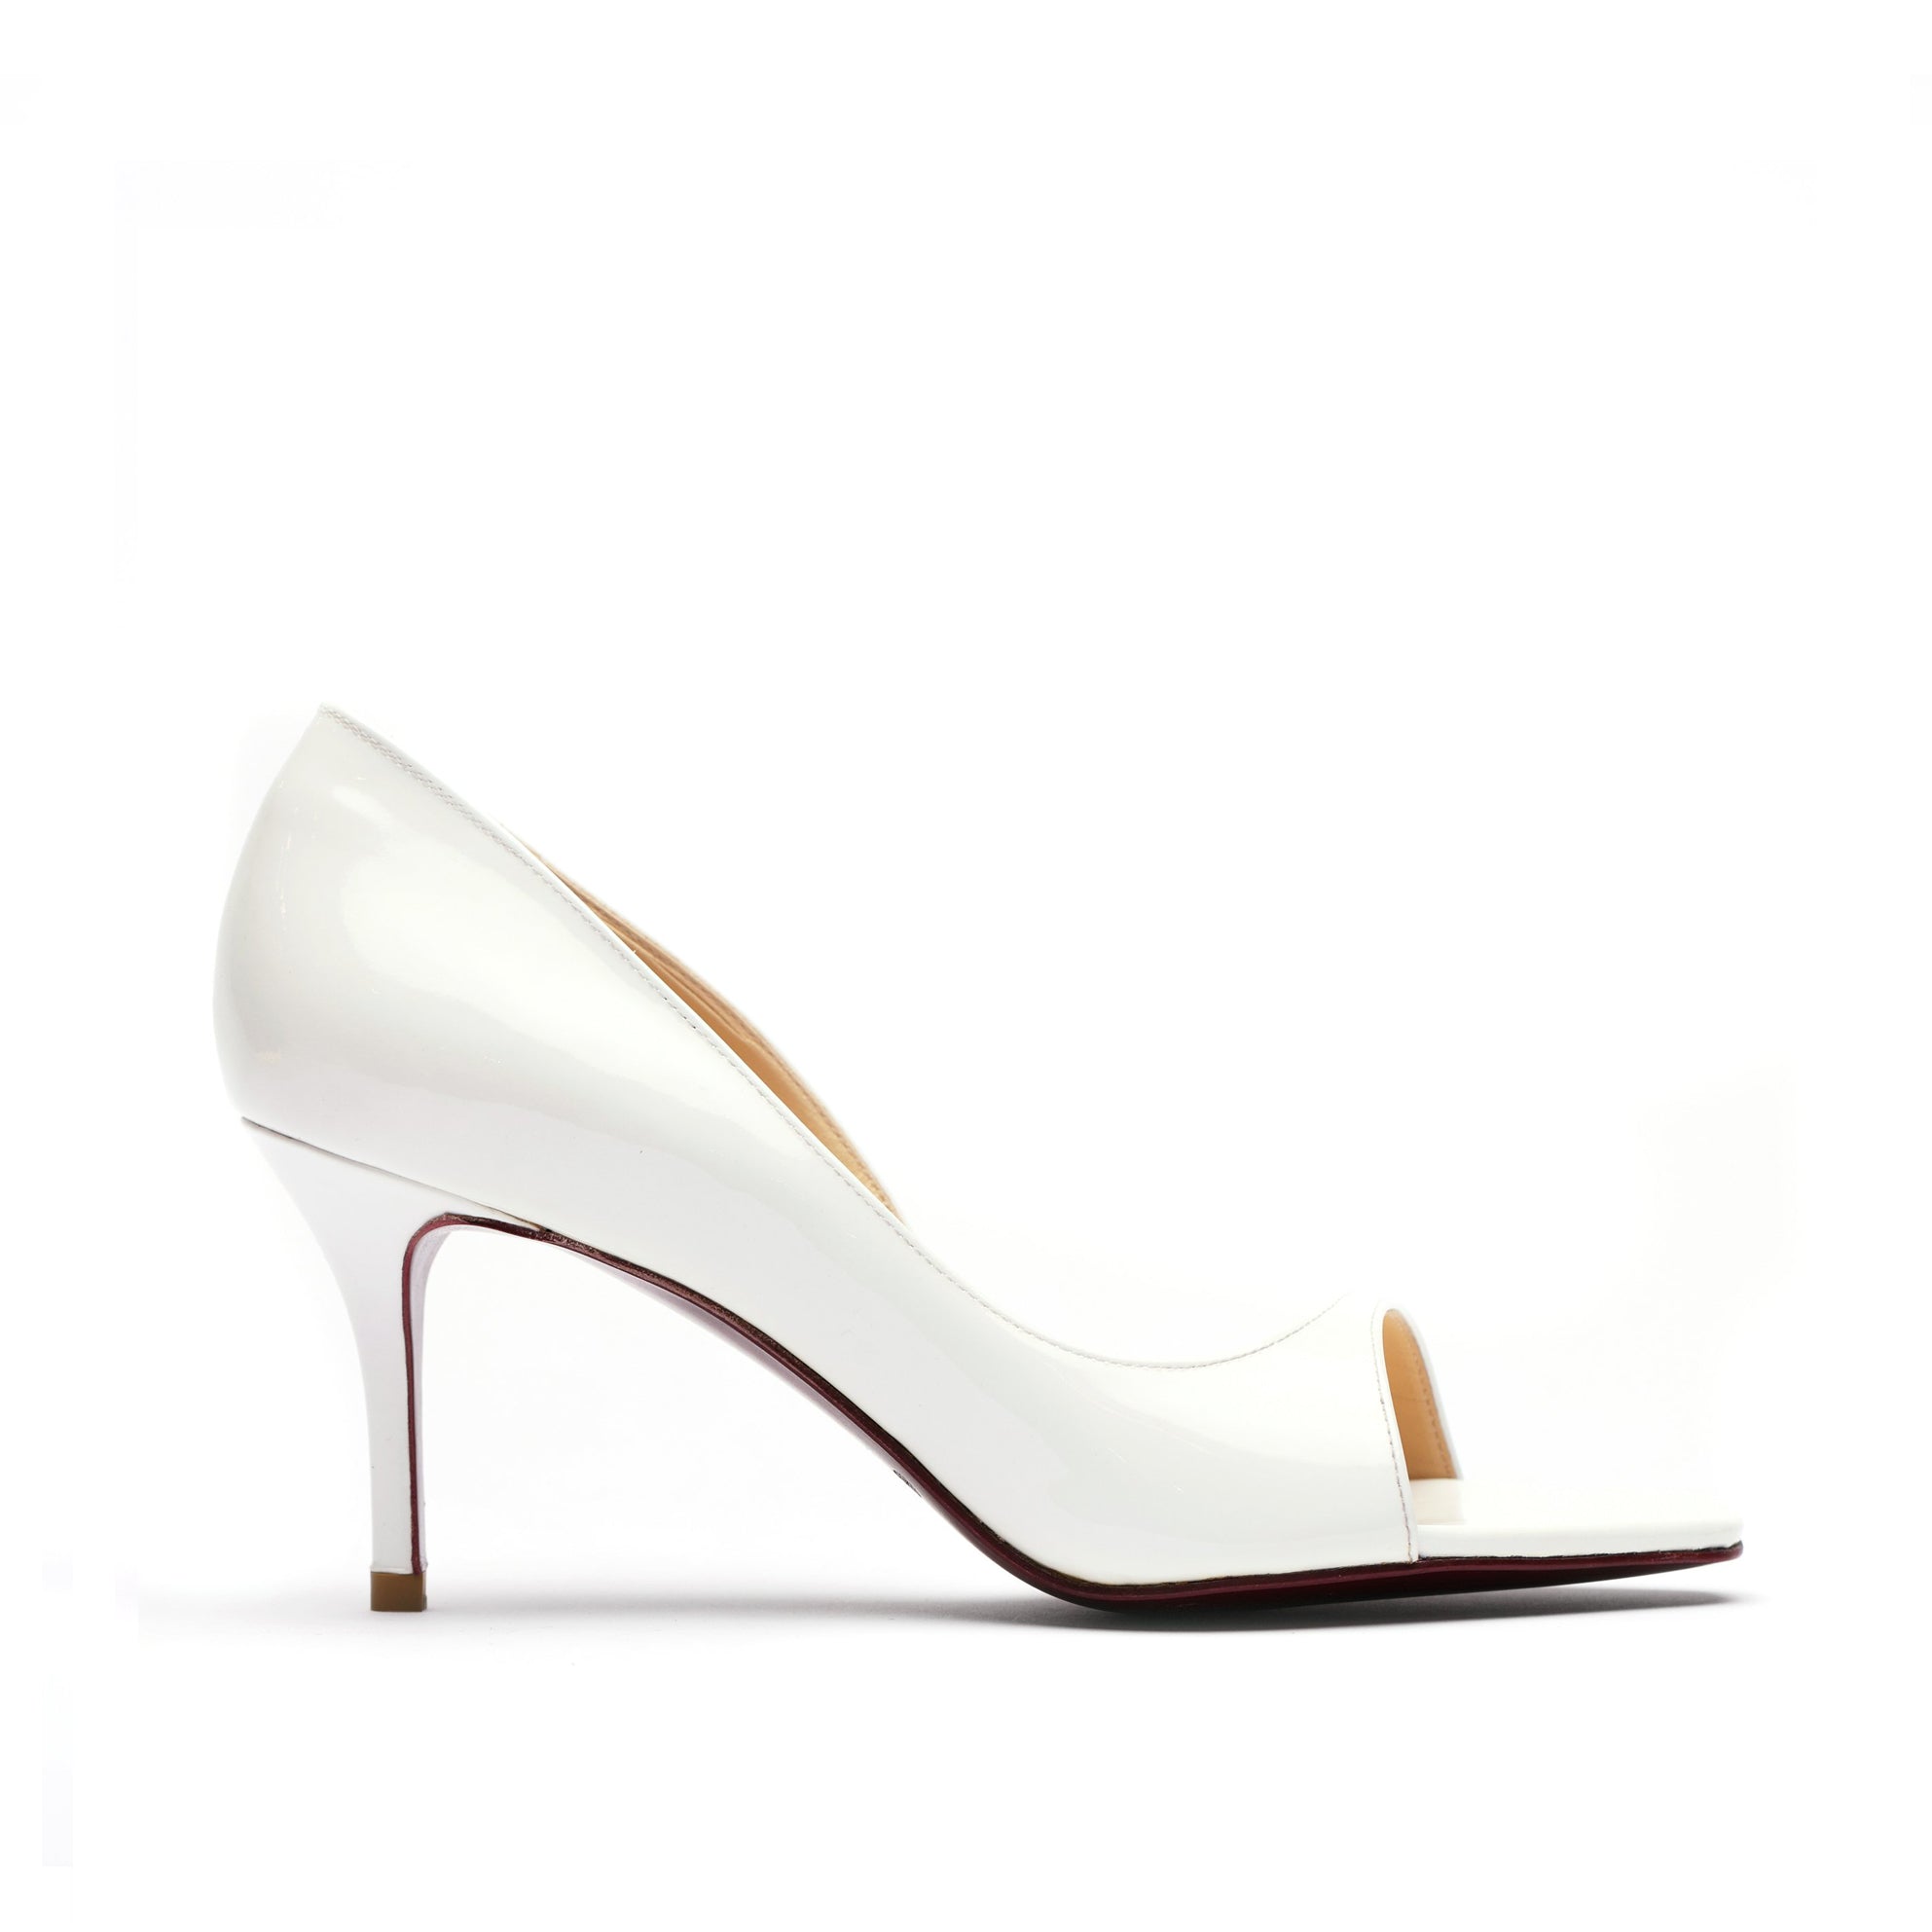 [women's] reunion - d'Orsay sandals - white patent leather